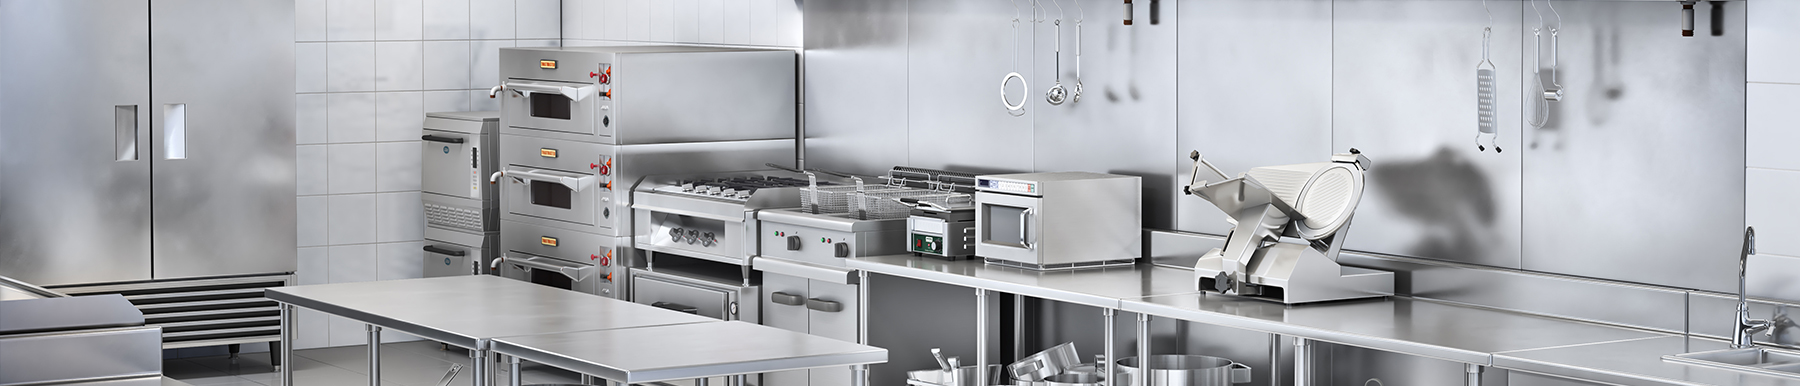 Catering Equipment Suppliers Near Neath Port Talbot | H2 Catering Equipment Catering Equipment